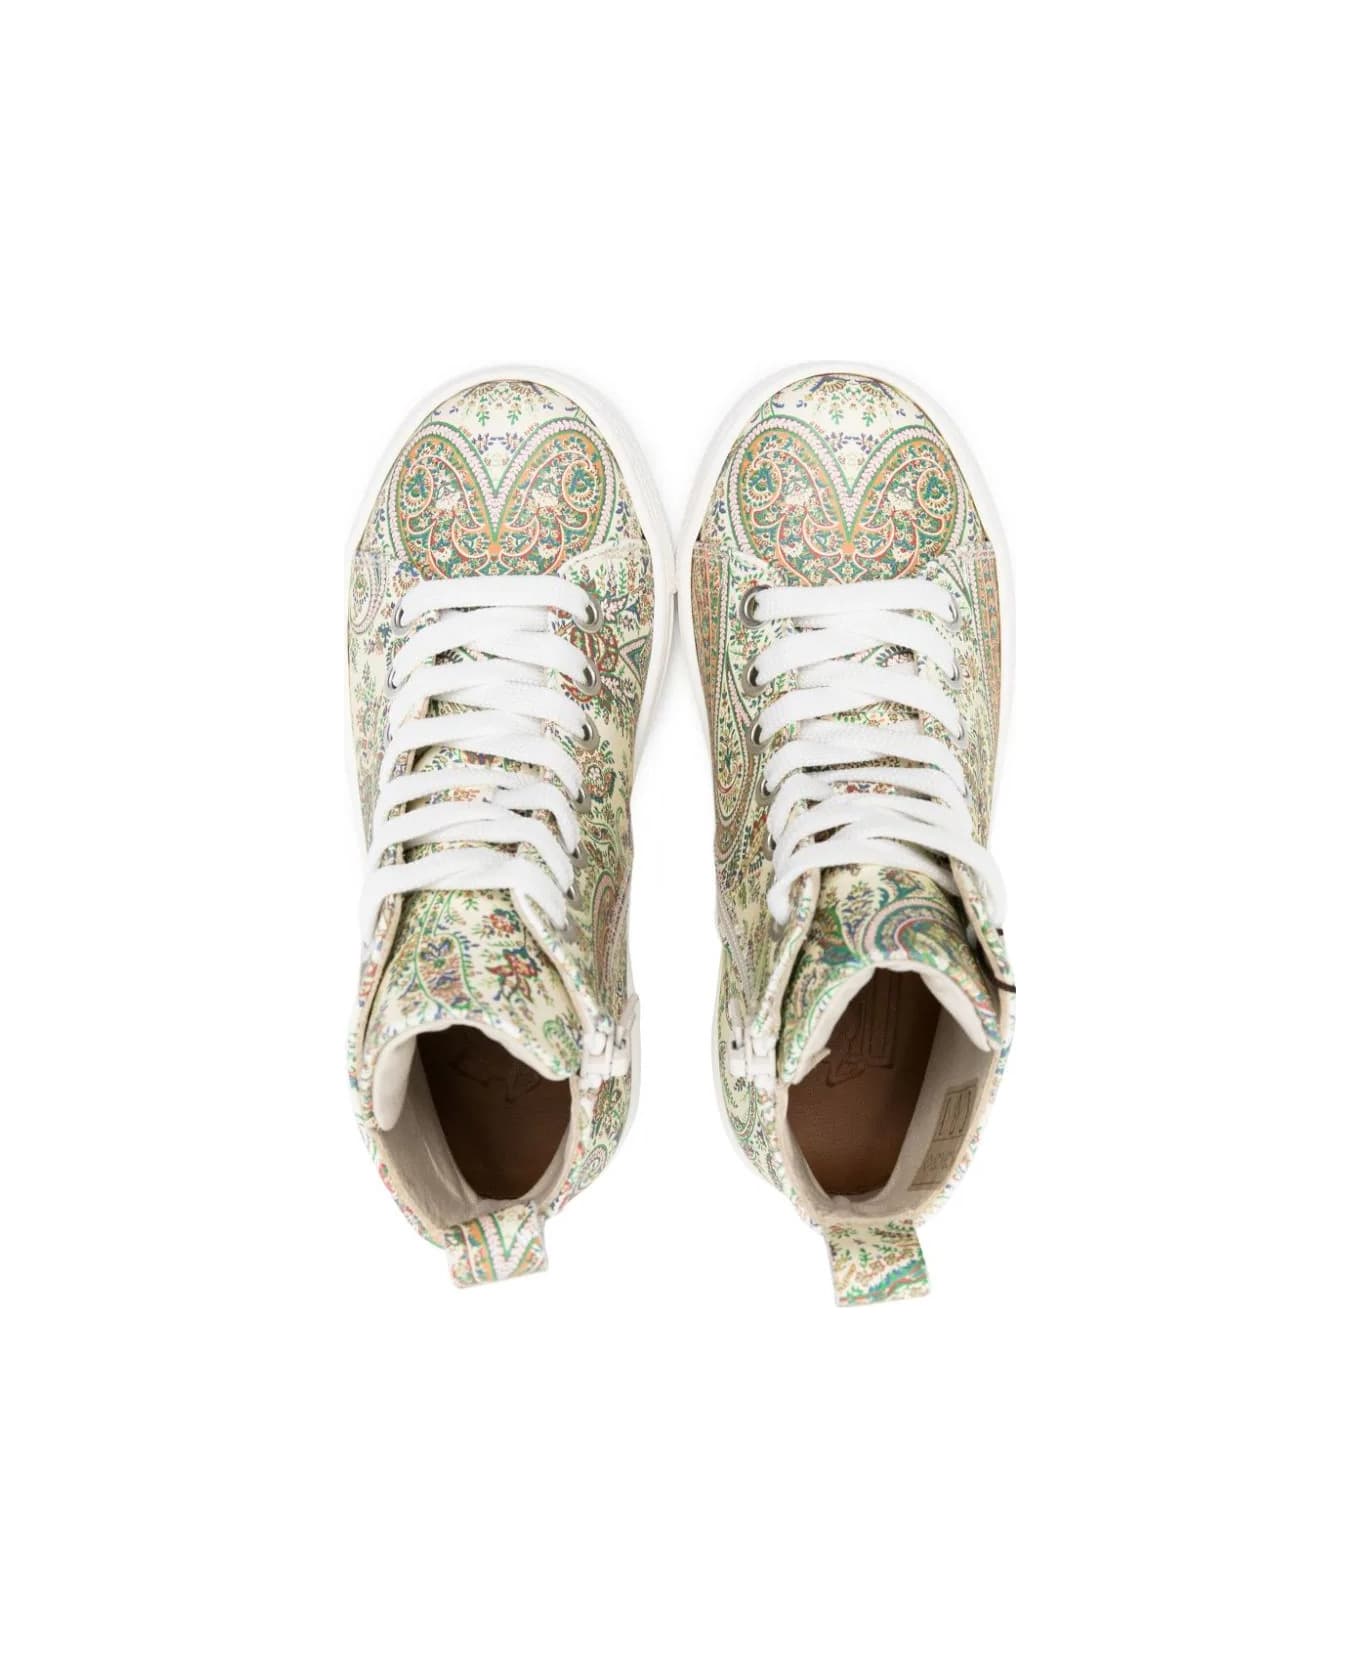 Etro High Sneakers With Multicolored Paisley Motif - Multicolour